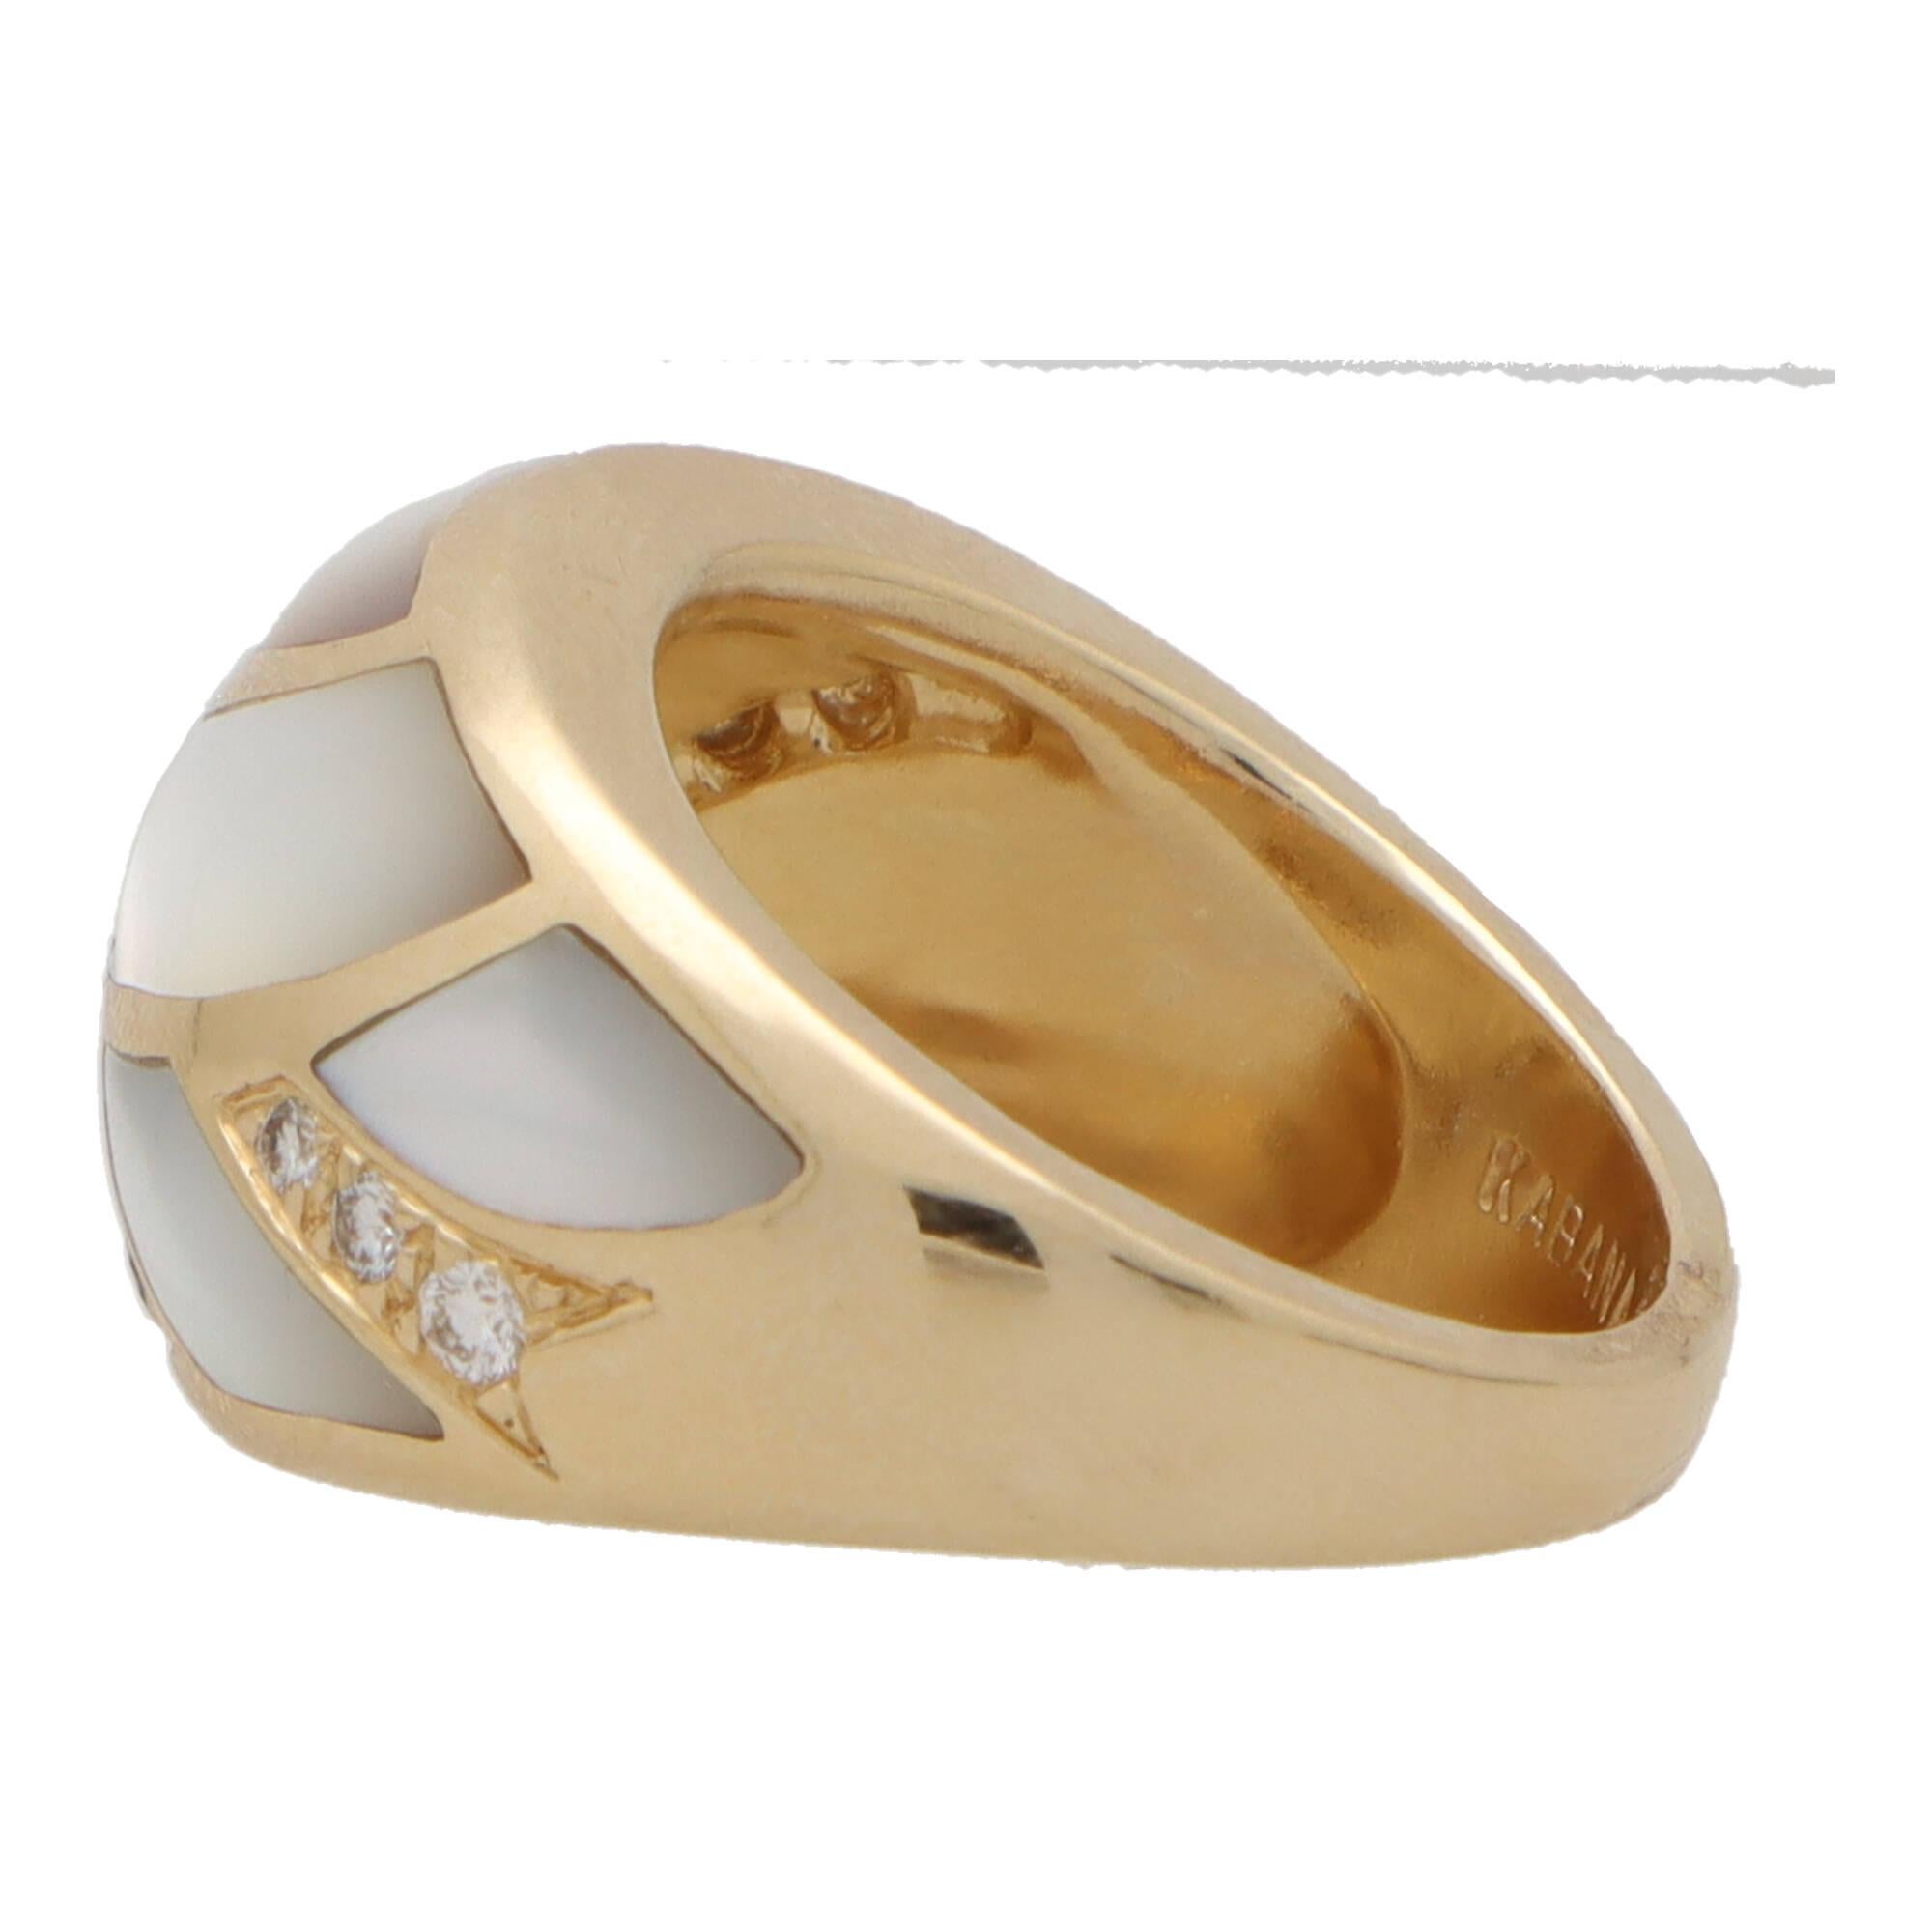  Vintage Mother of Pearl and Diamond Bombe Ring in 14k Yellow Gold In Excellent Condition For Sale In London, GB